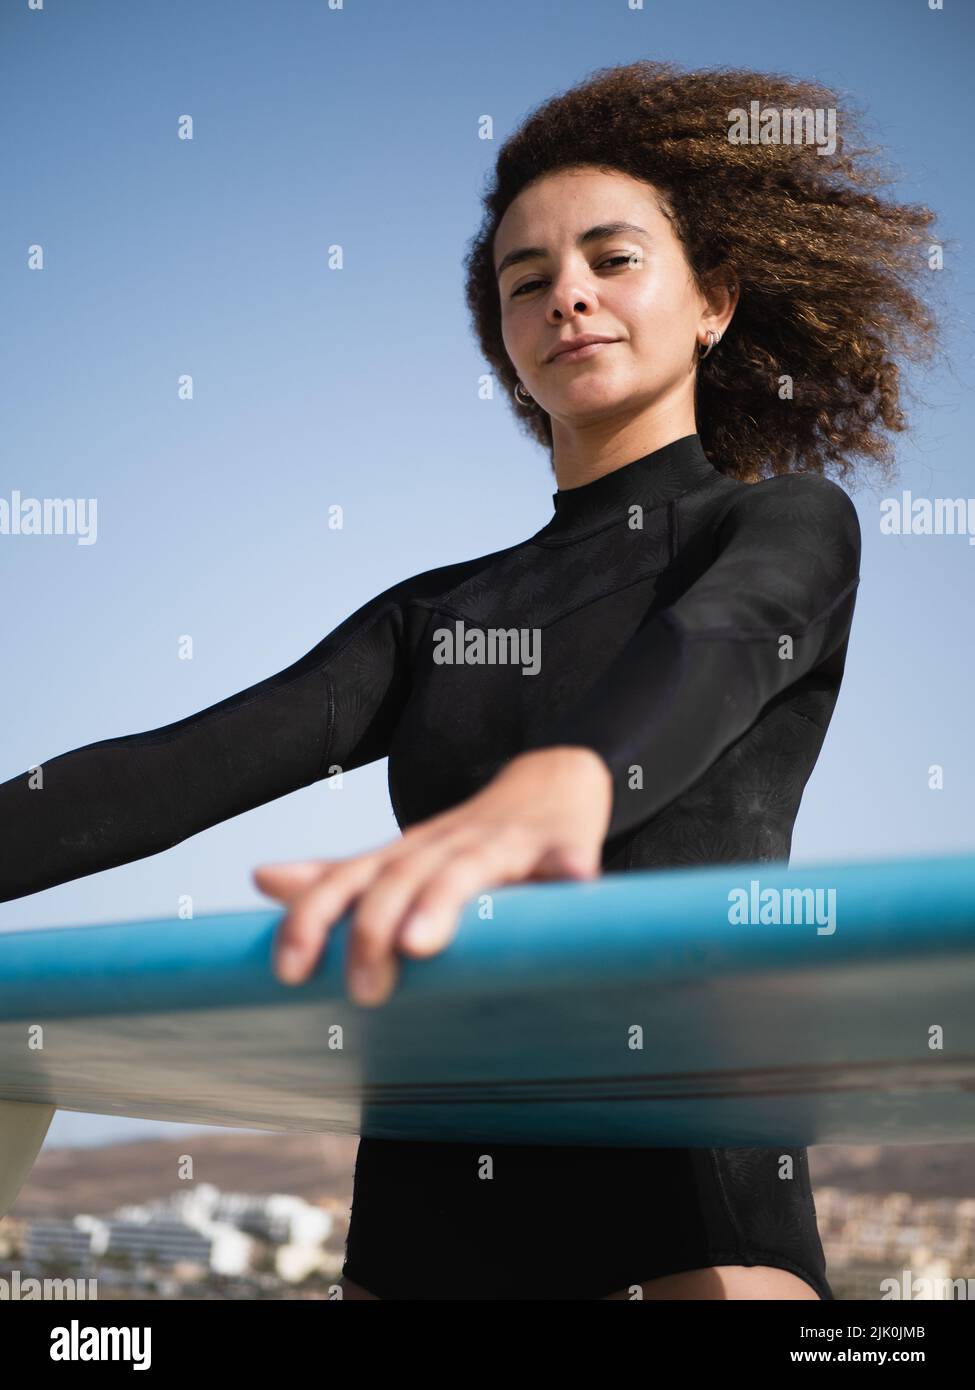 Surfer girl with afro hair portrait Stock Photo